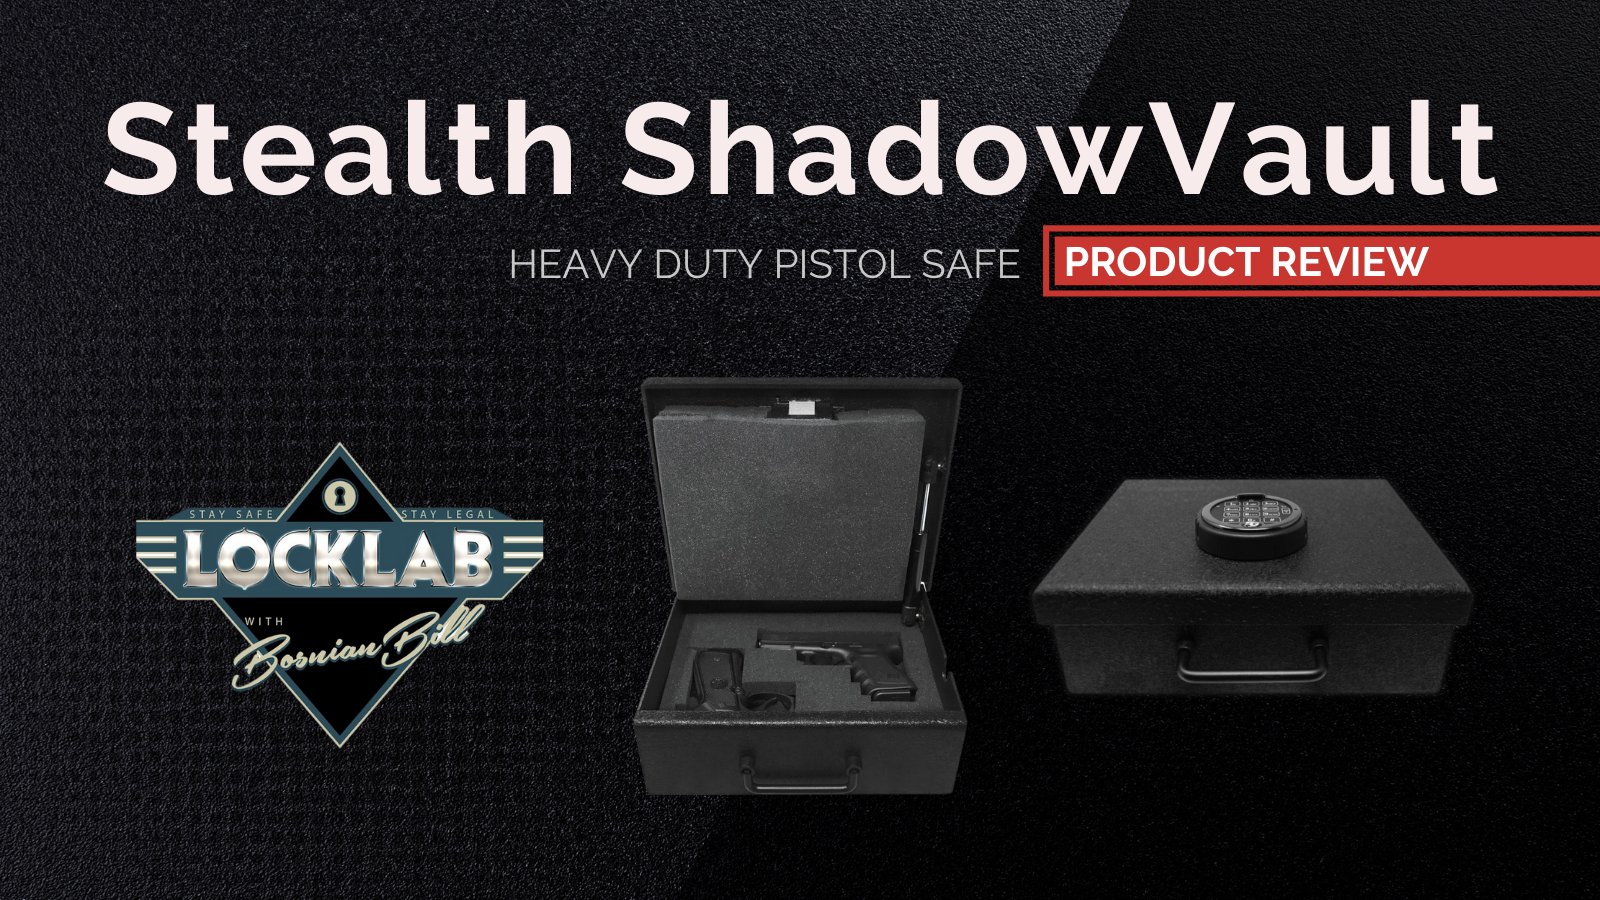 Stealth ShadowVault w/S&G Electronic Lock | Bosnianbill Product Review